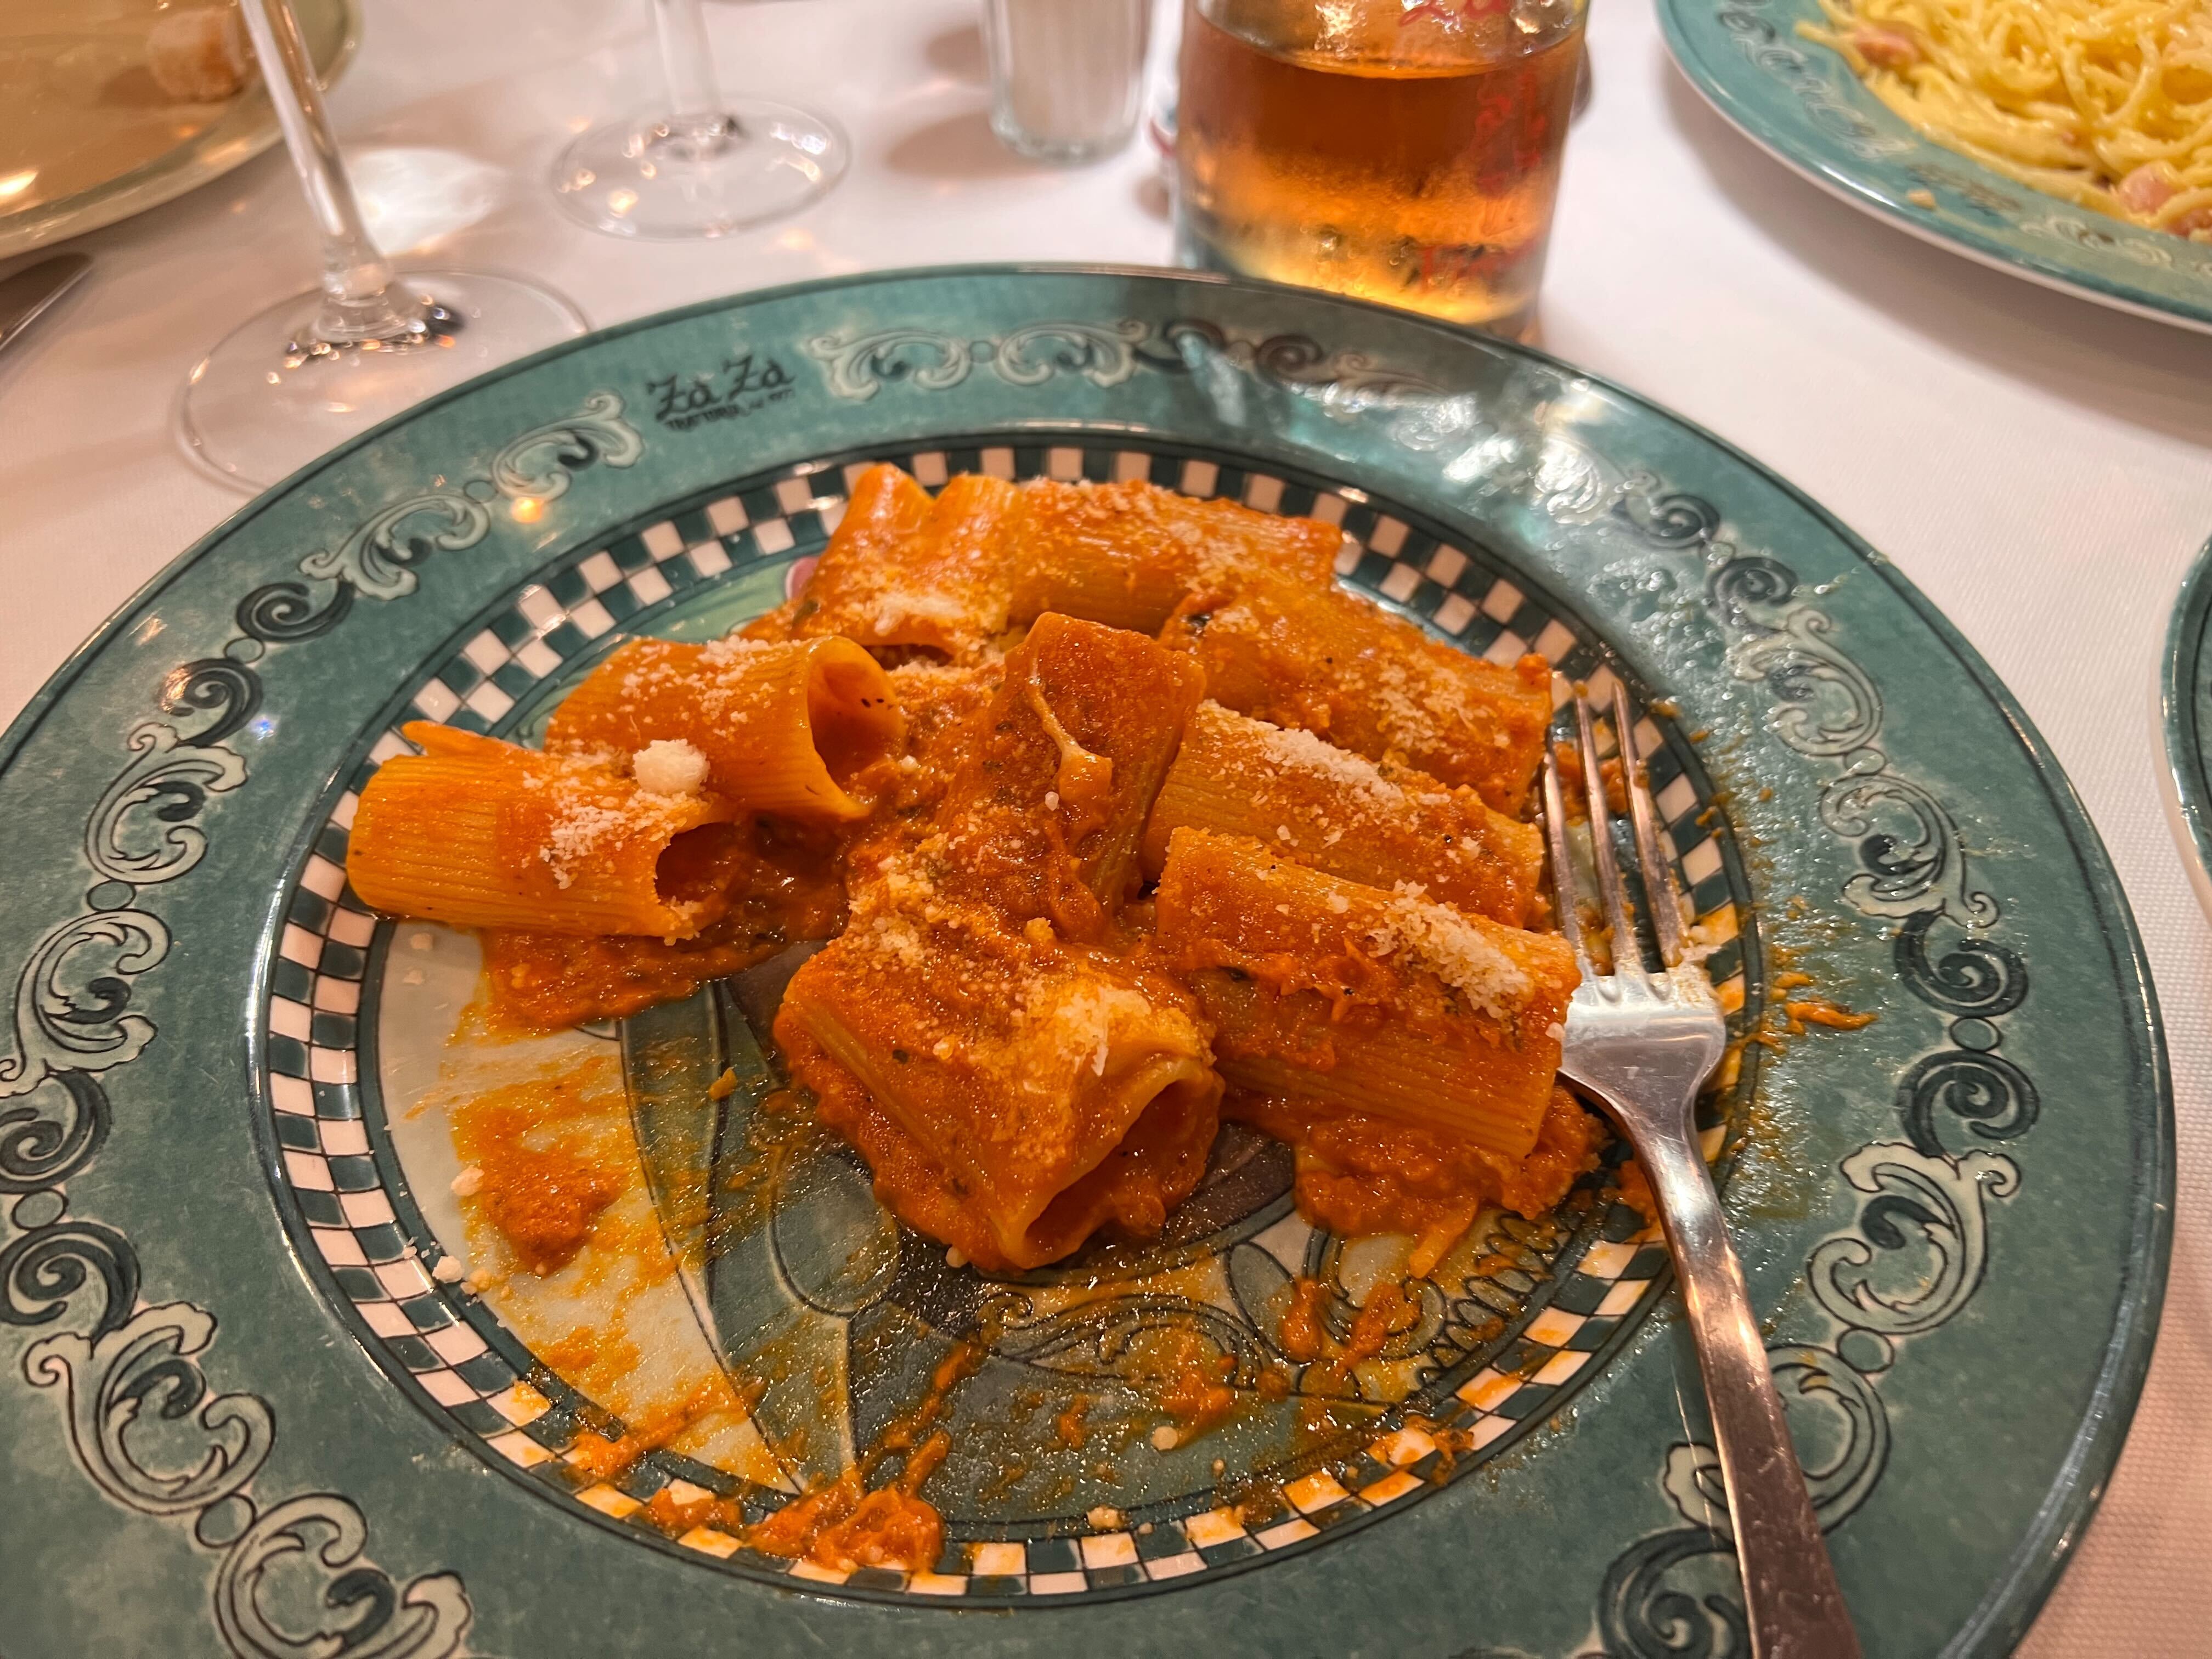 pasta from Florence, Italy